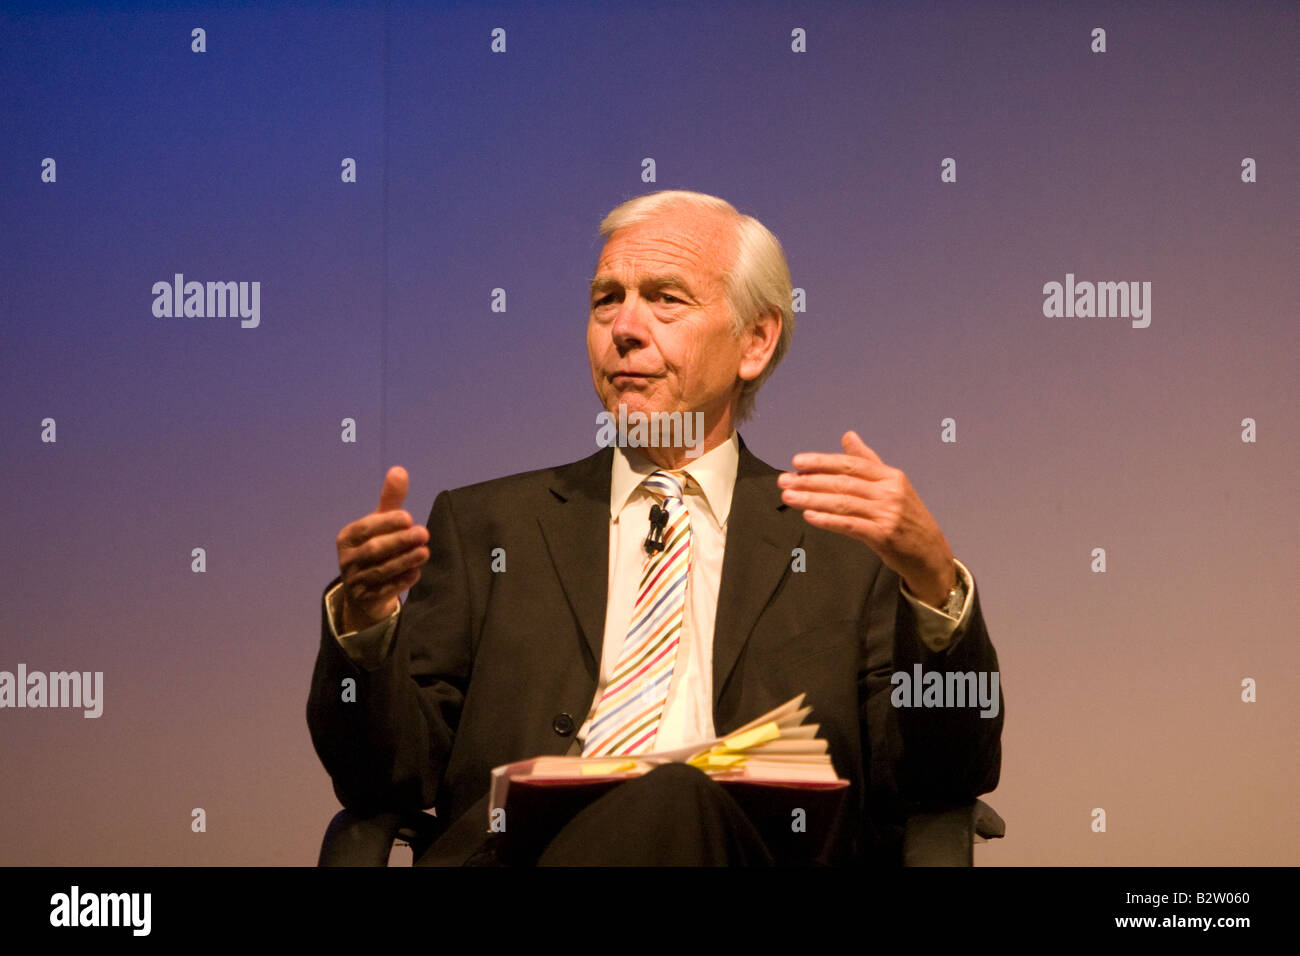 Broadcaster John Humphrys speaking at a trade conference Stock Photo